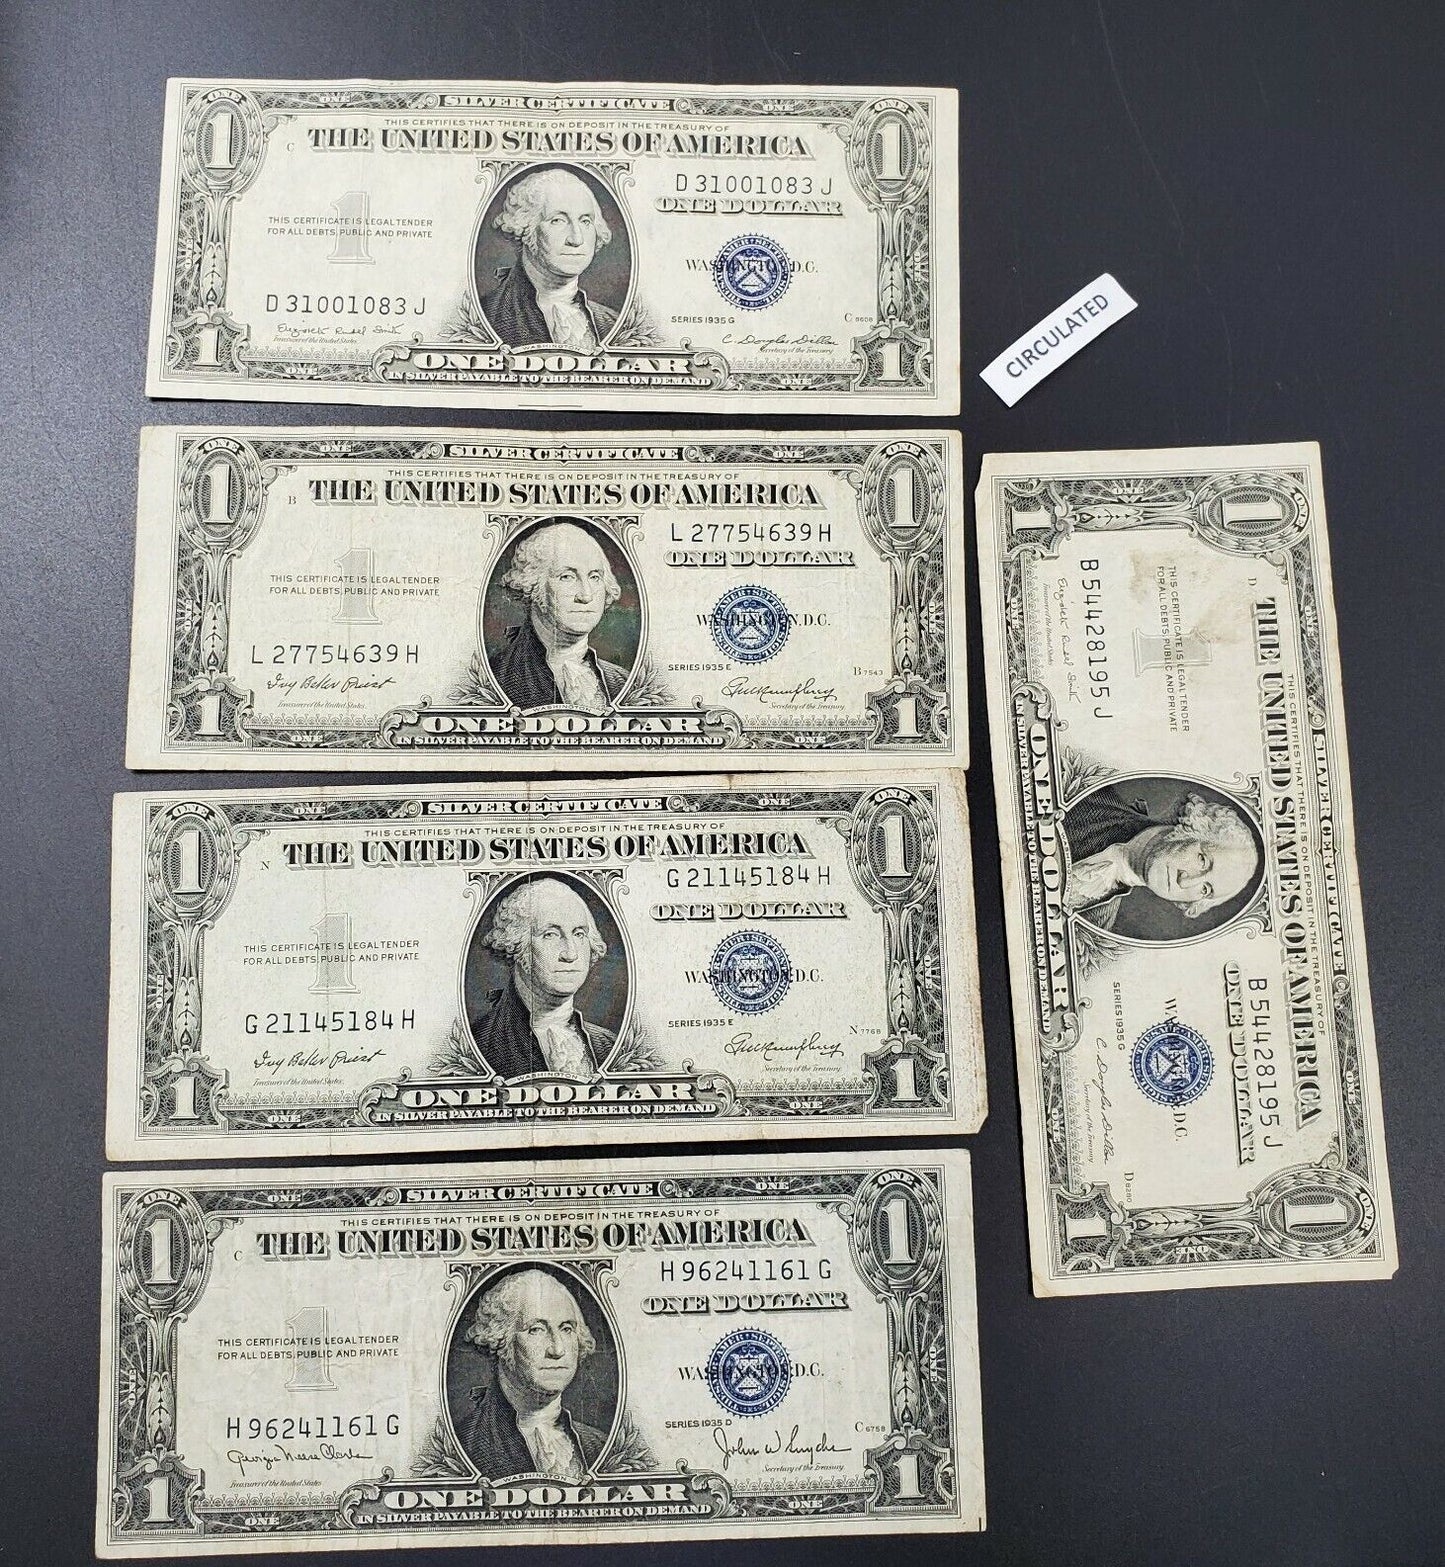 LOT 5 Note 1957 $1 SILVER CERTIFICATE NOTE BILL BLUE SEAL Repeat Serial #s VG+